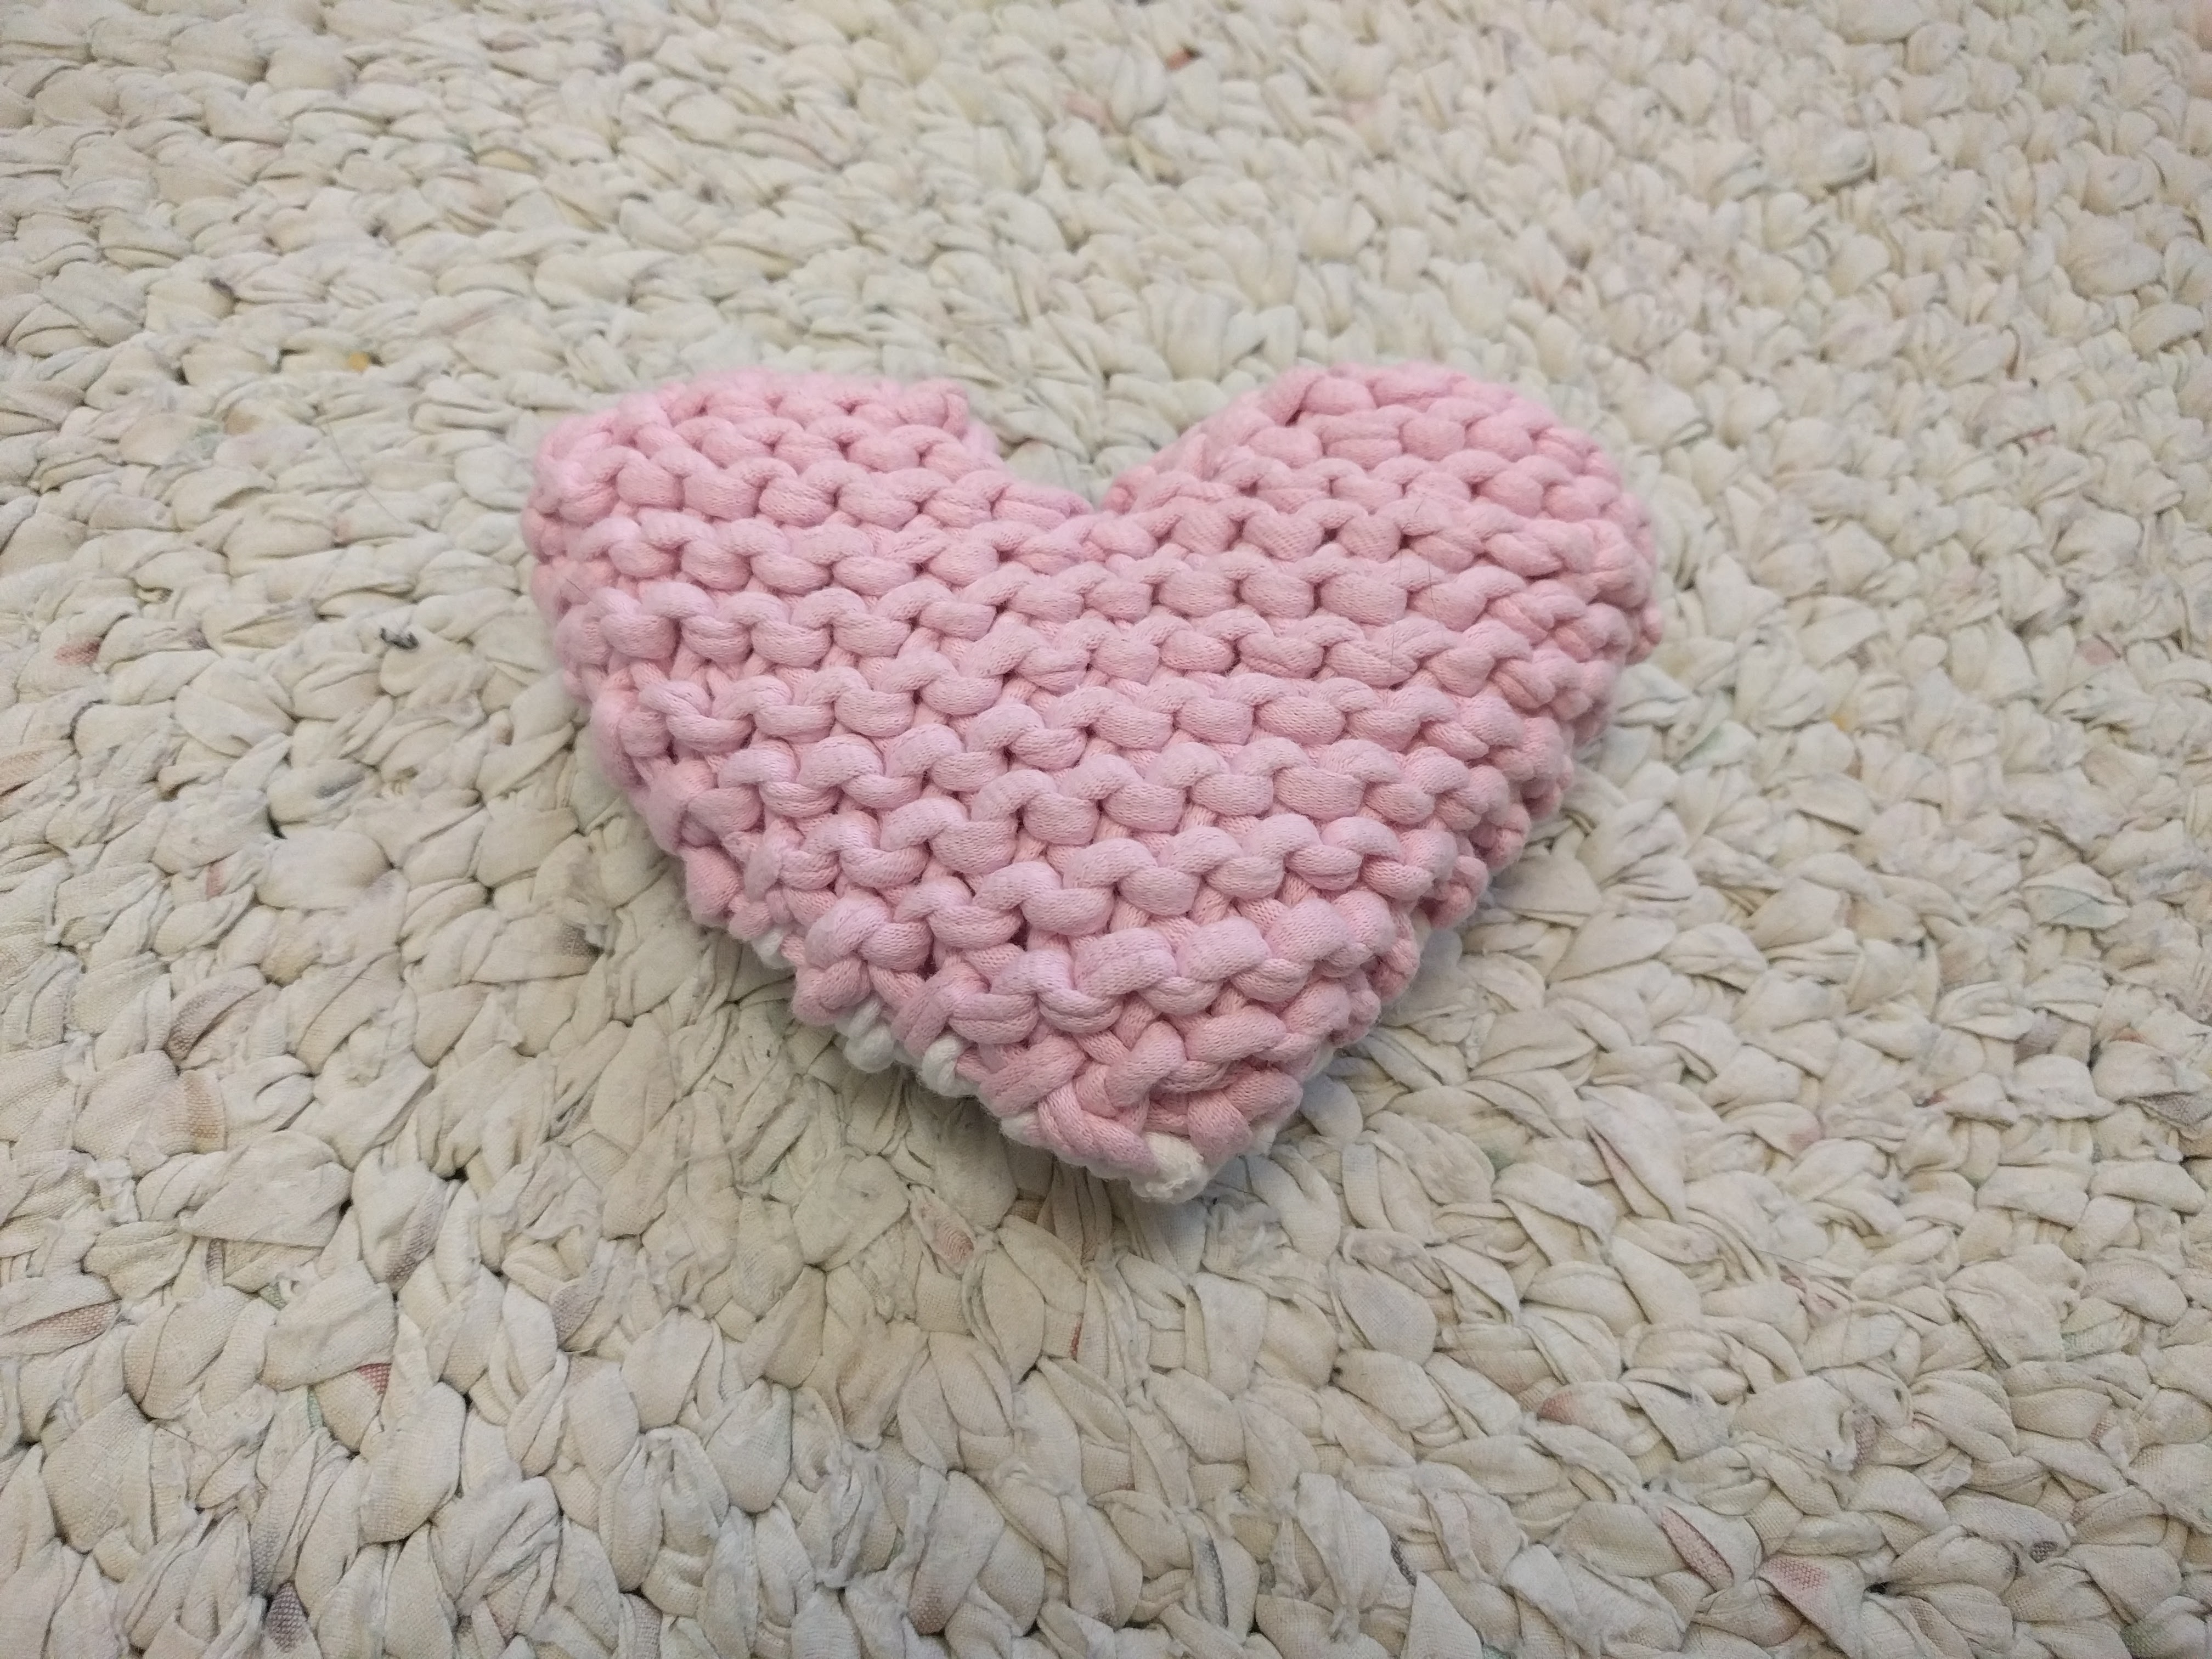 A pink knitted heart